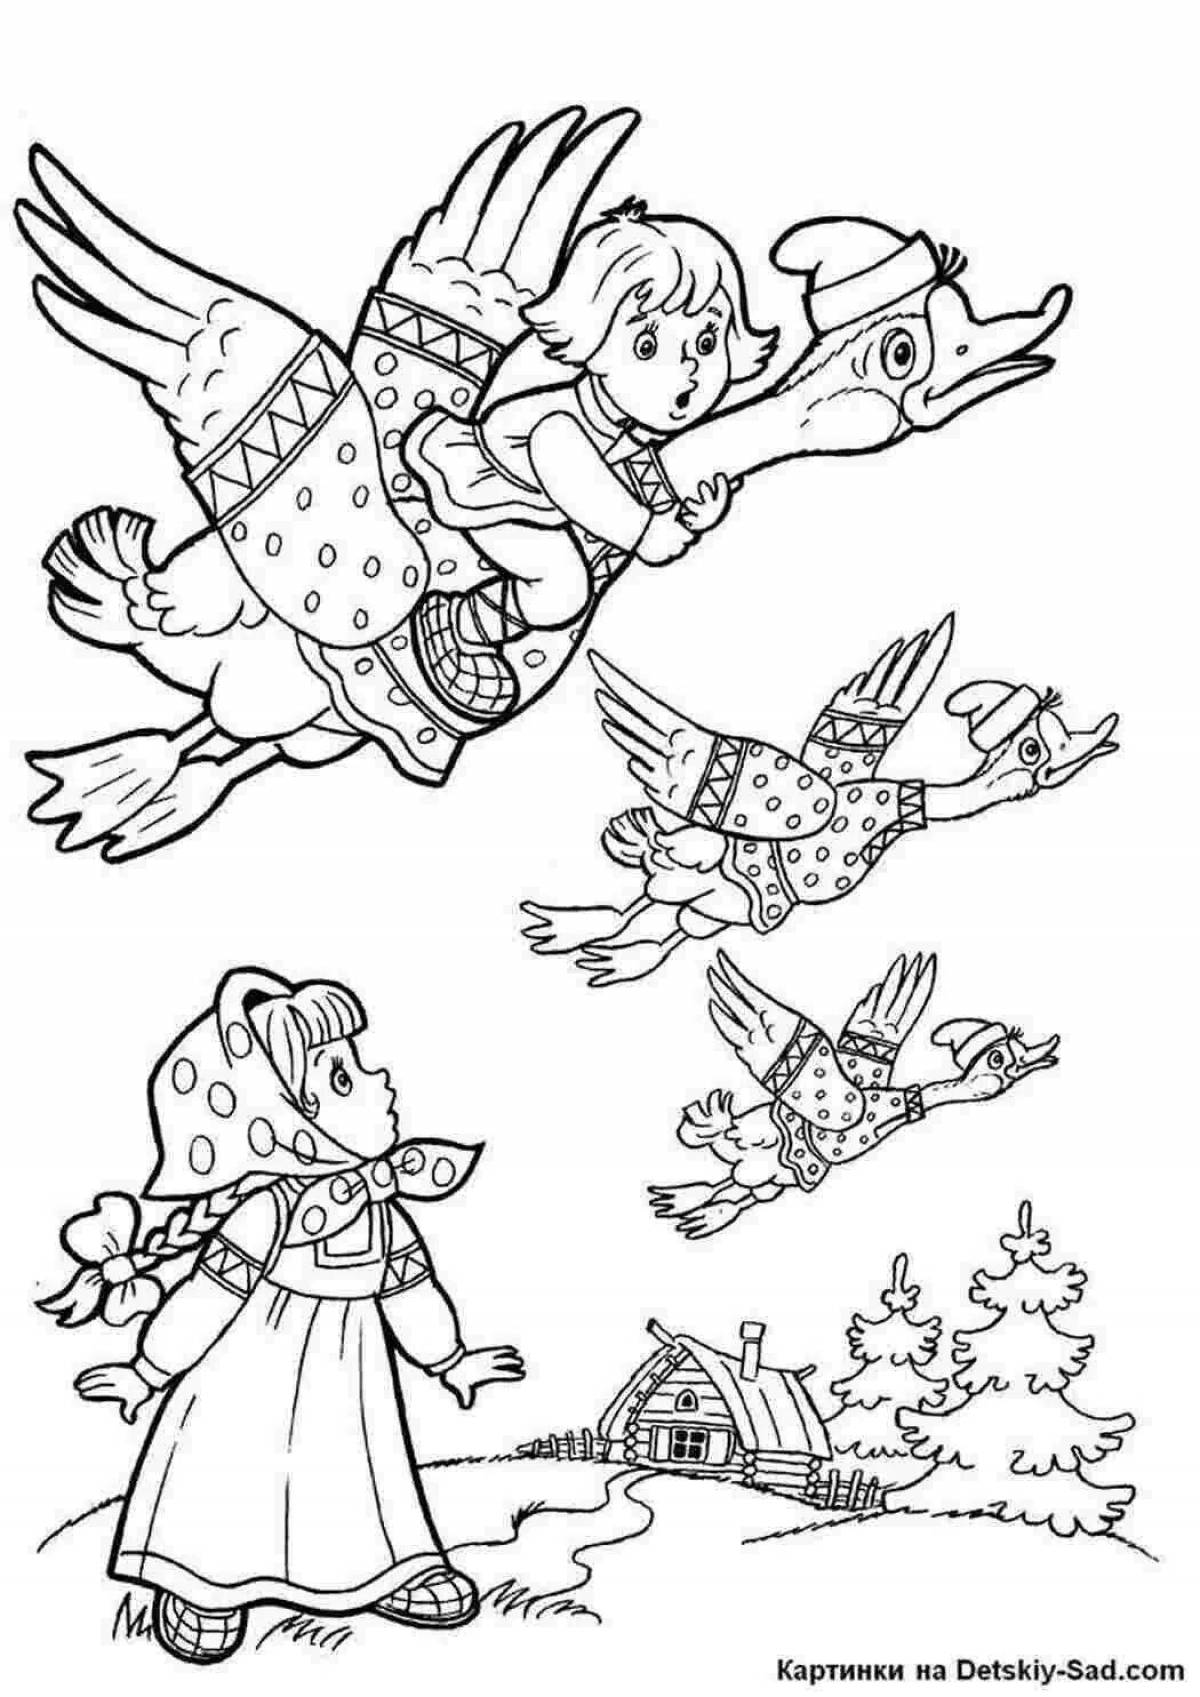 Great swan geese coloring book for kids